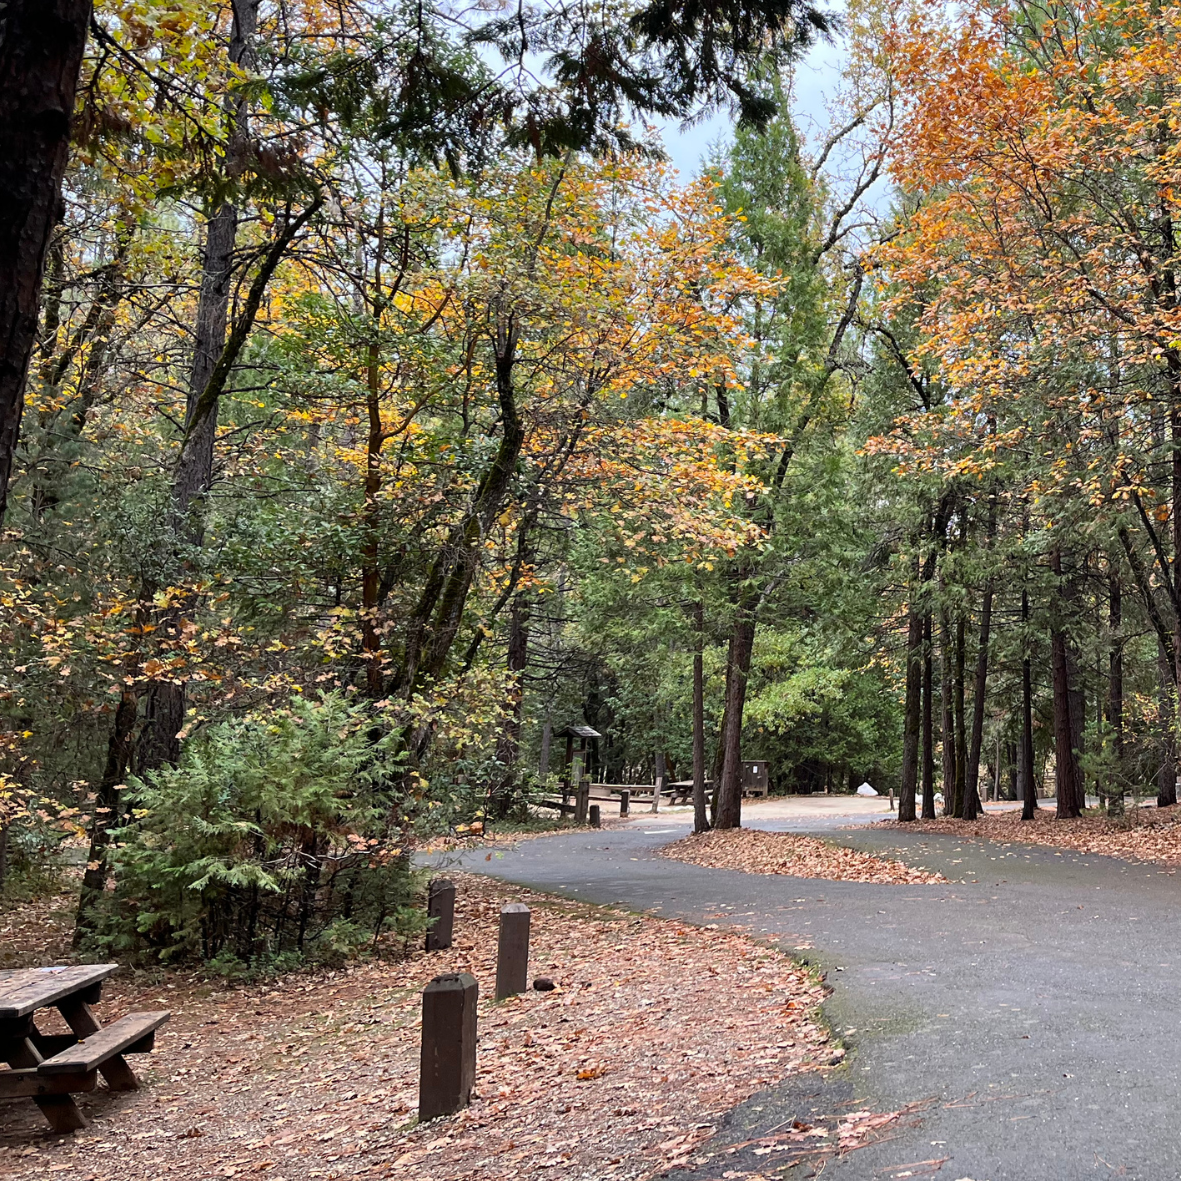 Paved road in the campground 